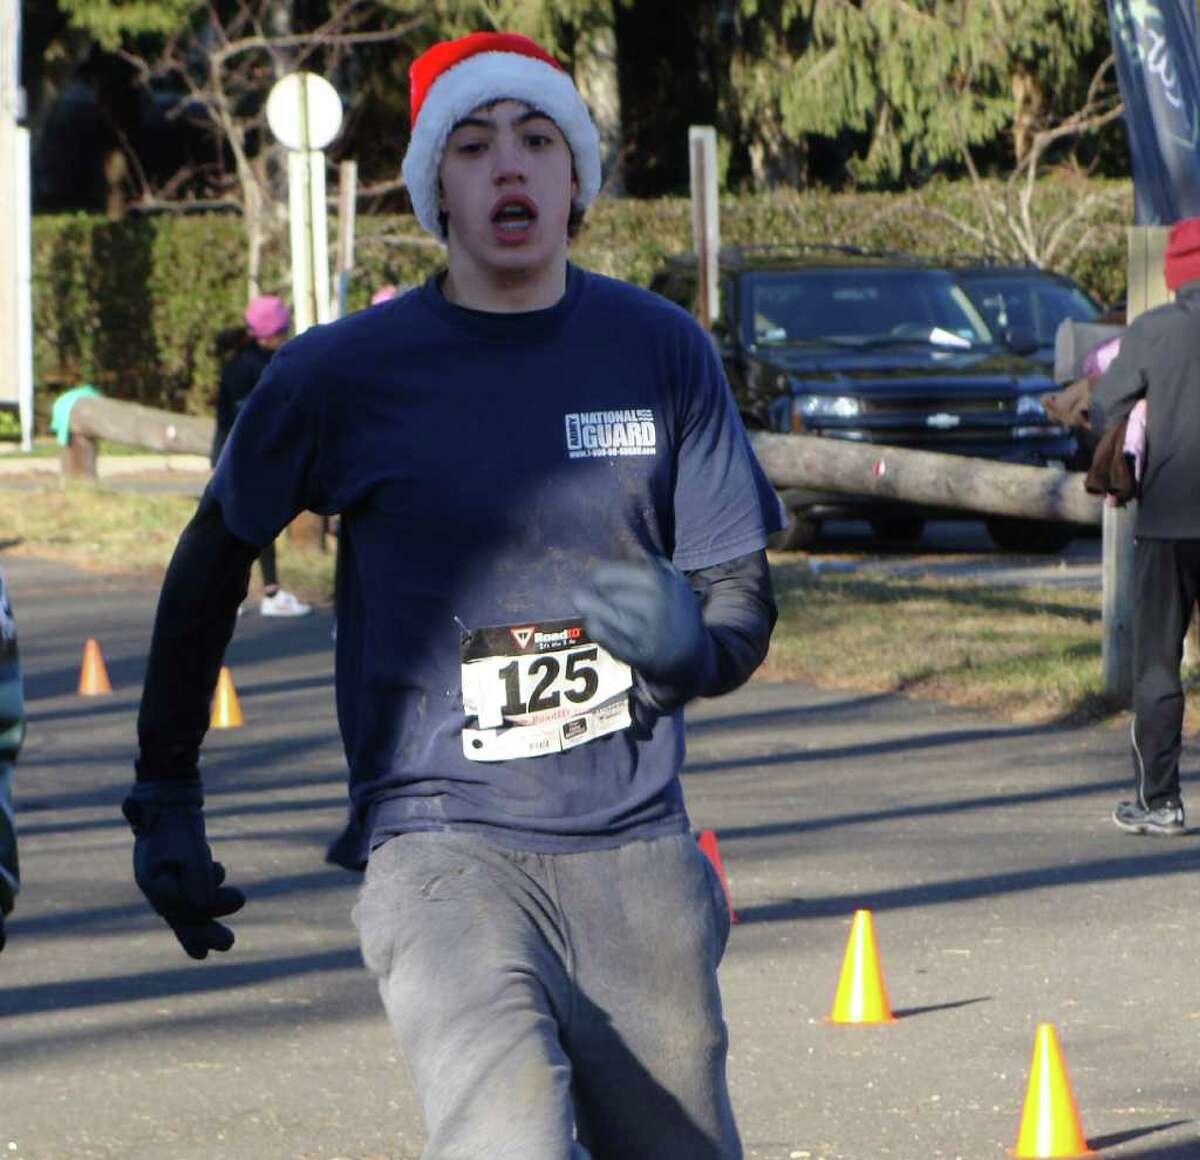 Mike Dana, 16, crosses the finish line in Sunday's 5K Holiday Run for Toys in Fairfield with a time of 24:31 wearing a Santa cap. Dana donated a 10-piece set of board games as part of his race entry fee, "Because I just wanted to help out the kids," he said.